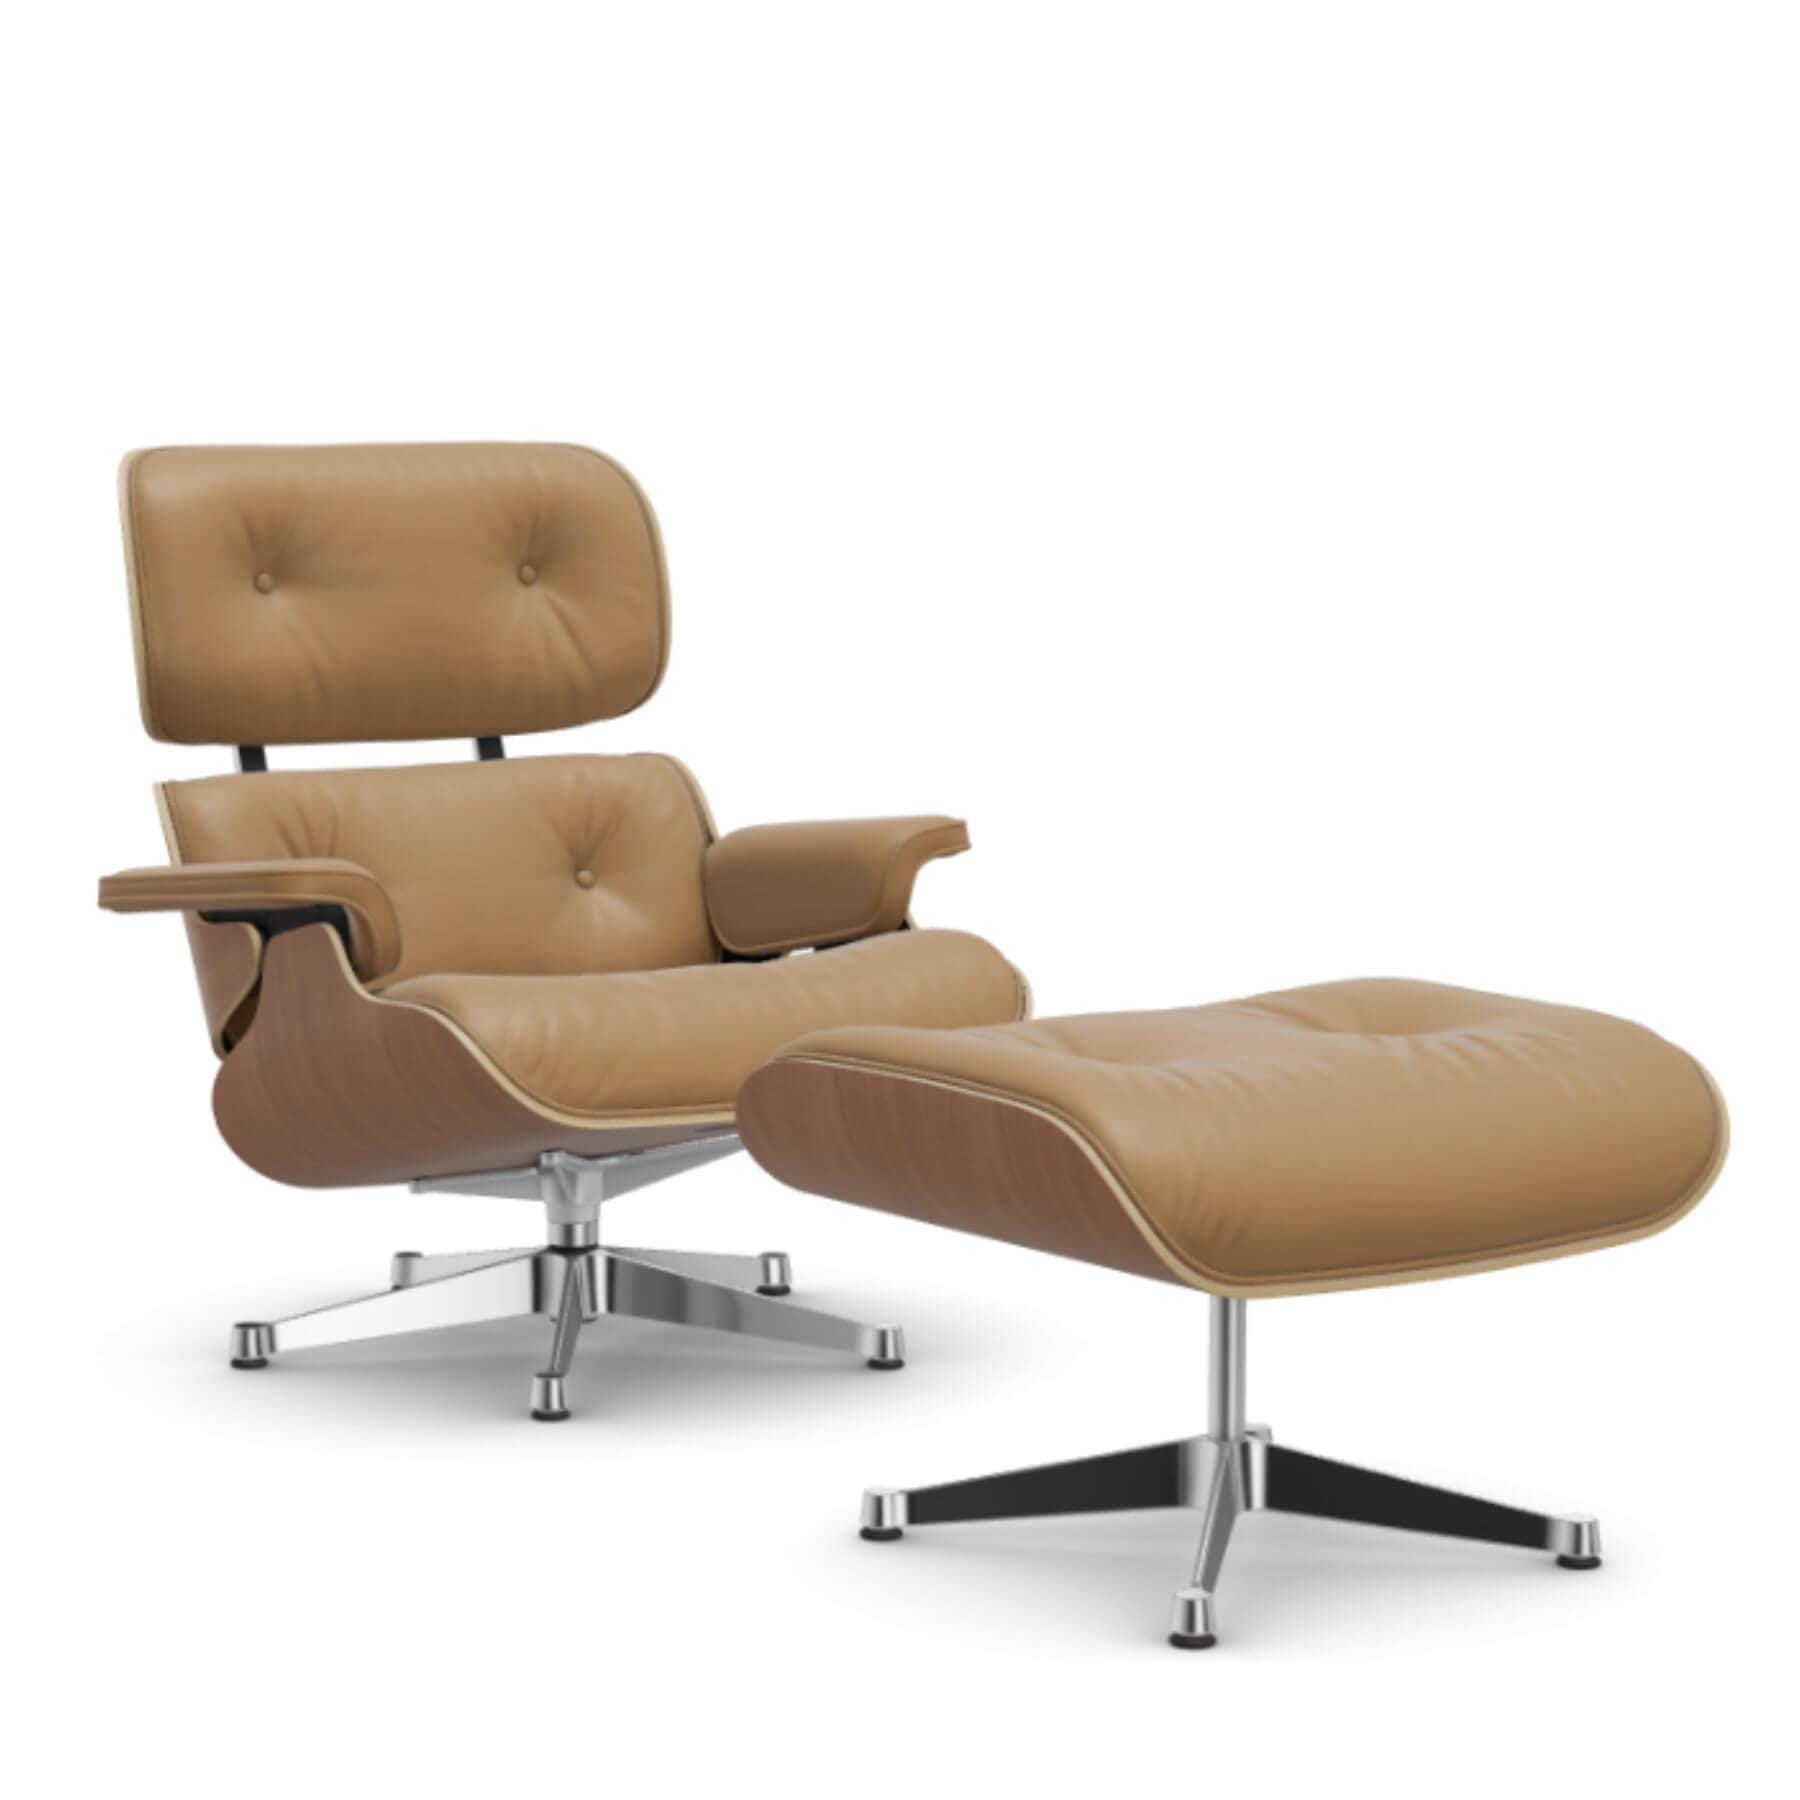 Vitra Eames Classic Lounge Chair American Cherry Leather Natural F Caramel Polished Aluminium With Ottoman Light Wood Designer Furniture From Holl